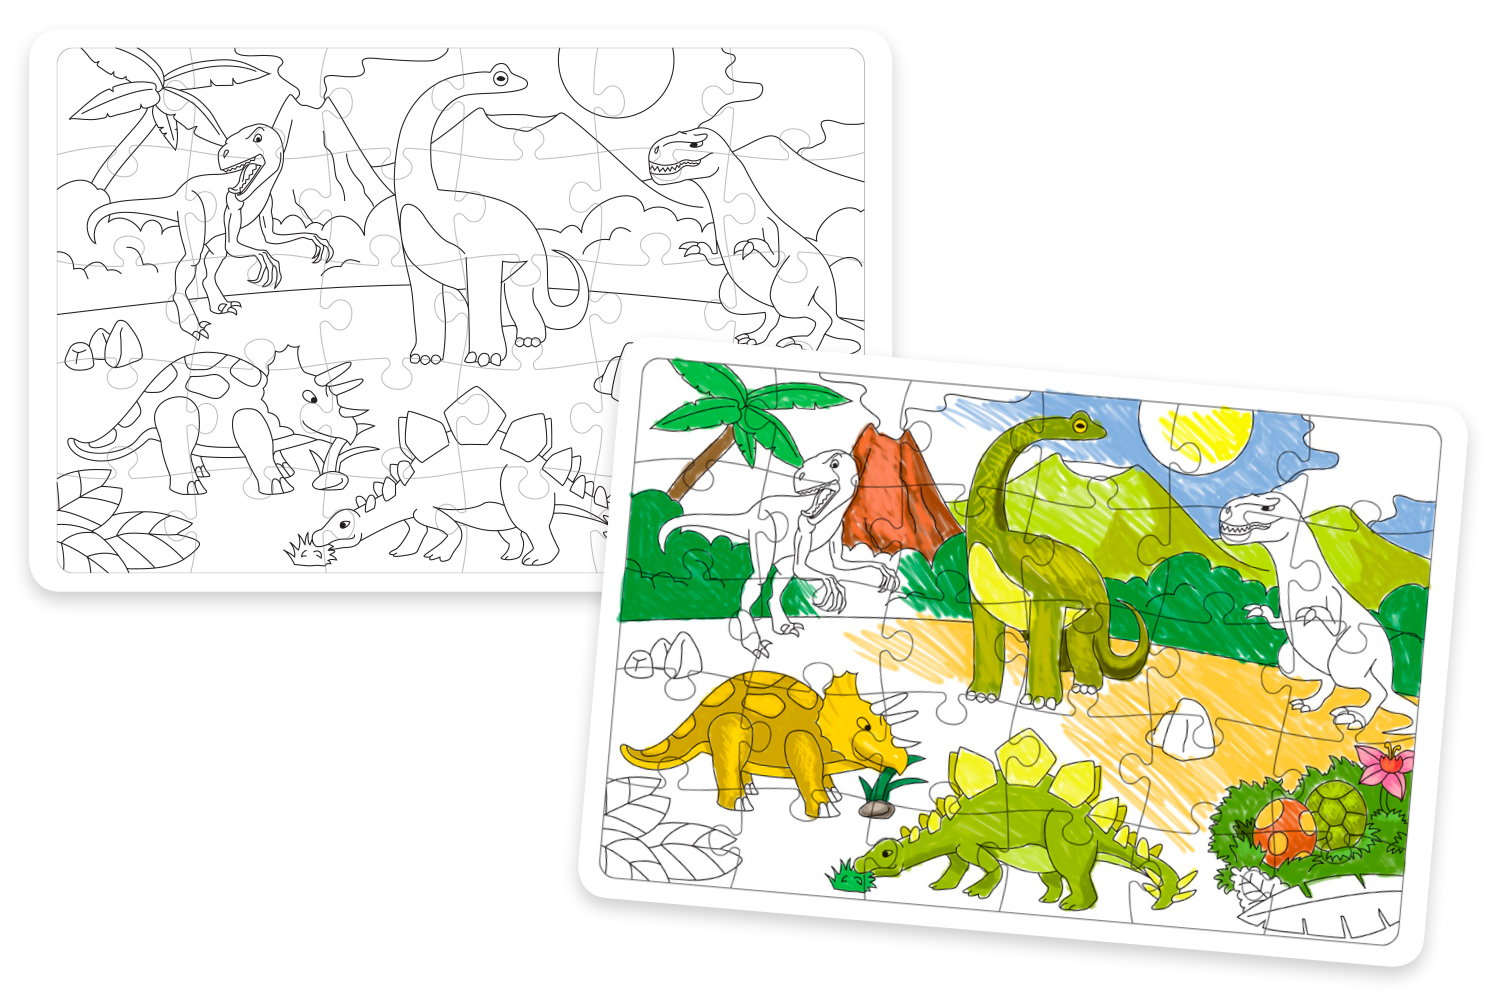 images/products/49-PHOTO-009-puzzle-dinosaure-5422.jpg